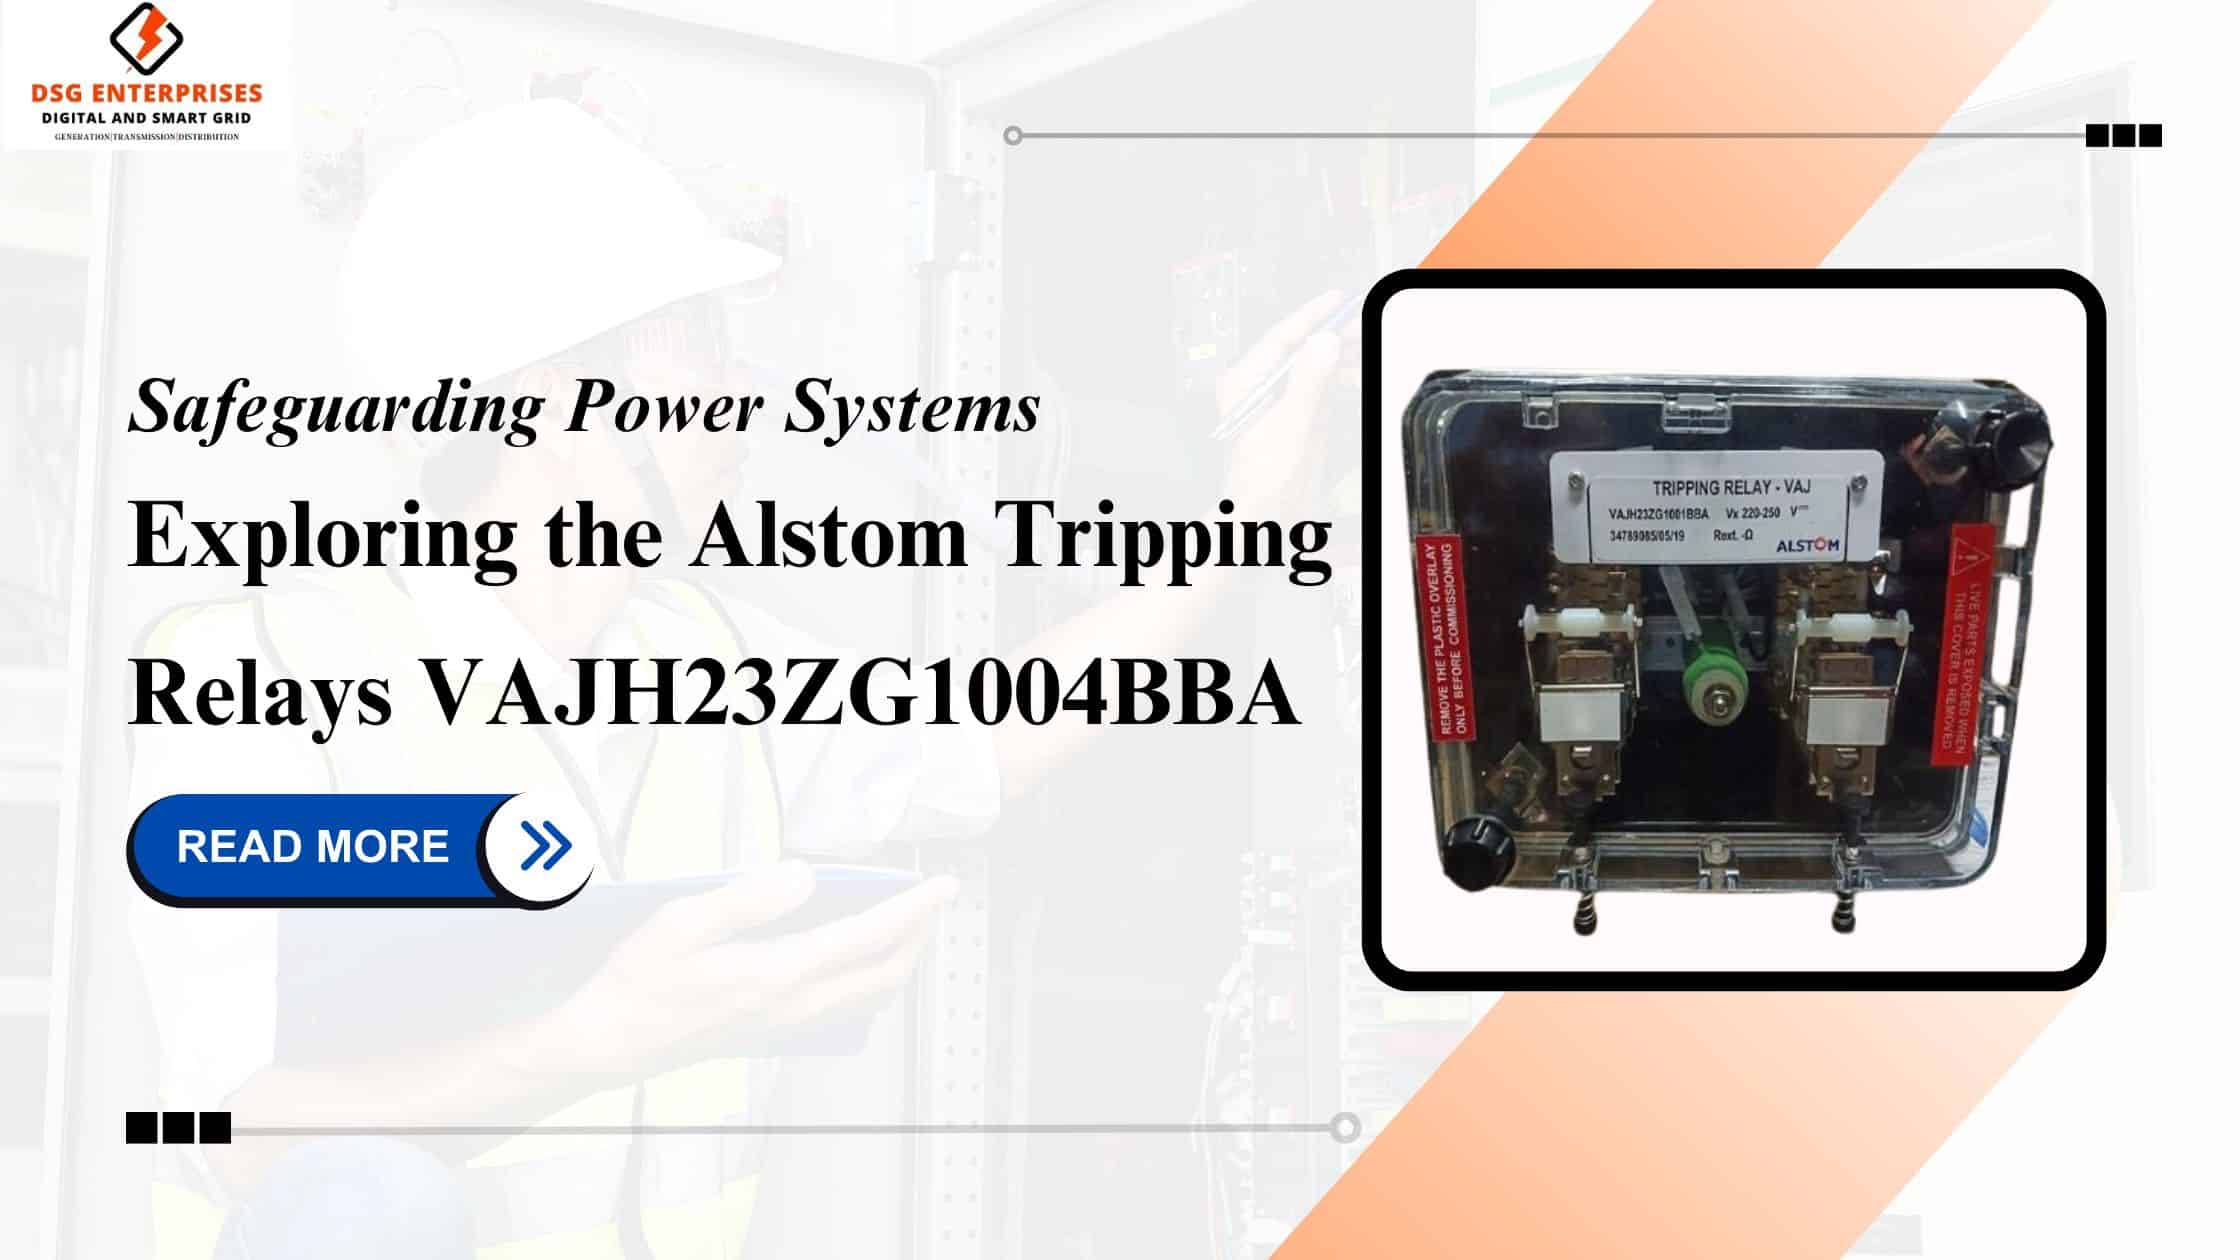 You are currently viewing Safeguarding Power Systems: Exploring the Alstom Tripping relays VAJH23ZG1004BBA